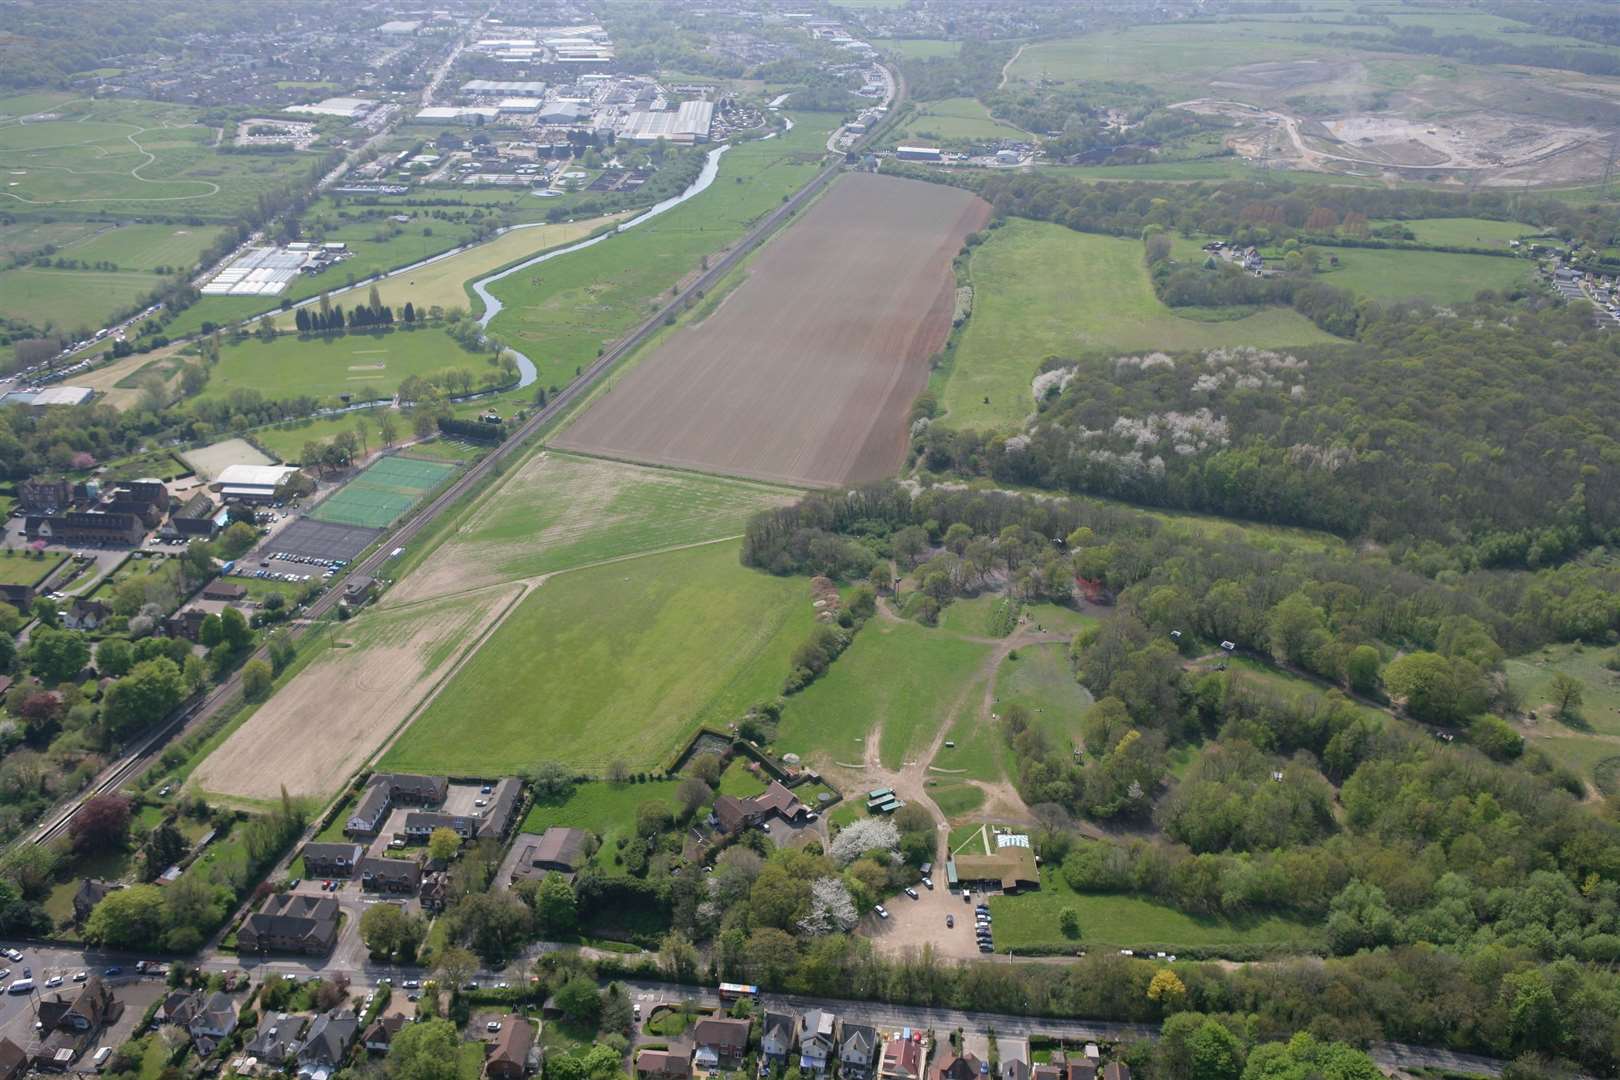 The site in Sturry, near Canterbury, is earmarked for hundreds of homes